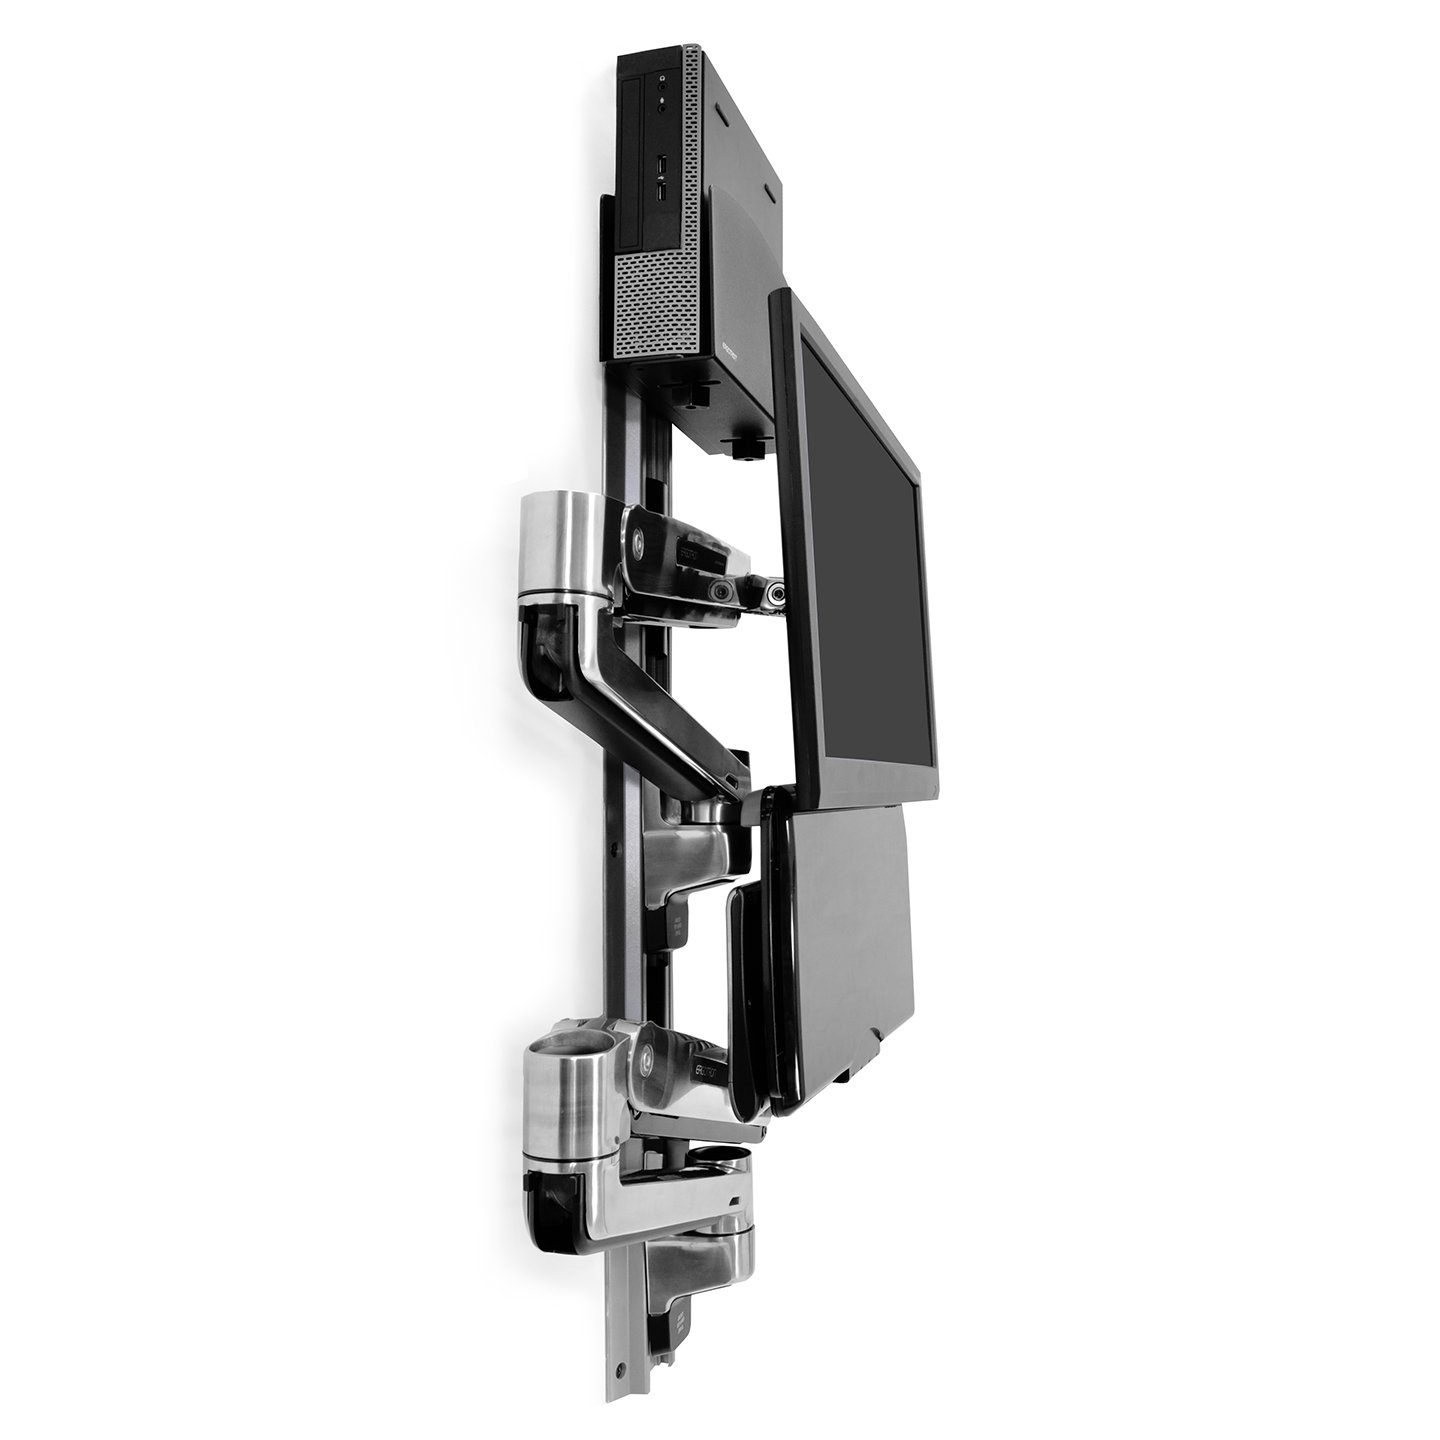 Haworth LX Wall Mount System Workspace with metal arms that can extend and fold and hold a monitor, pc, and keyboard